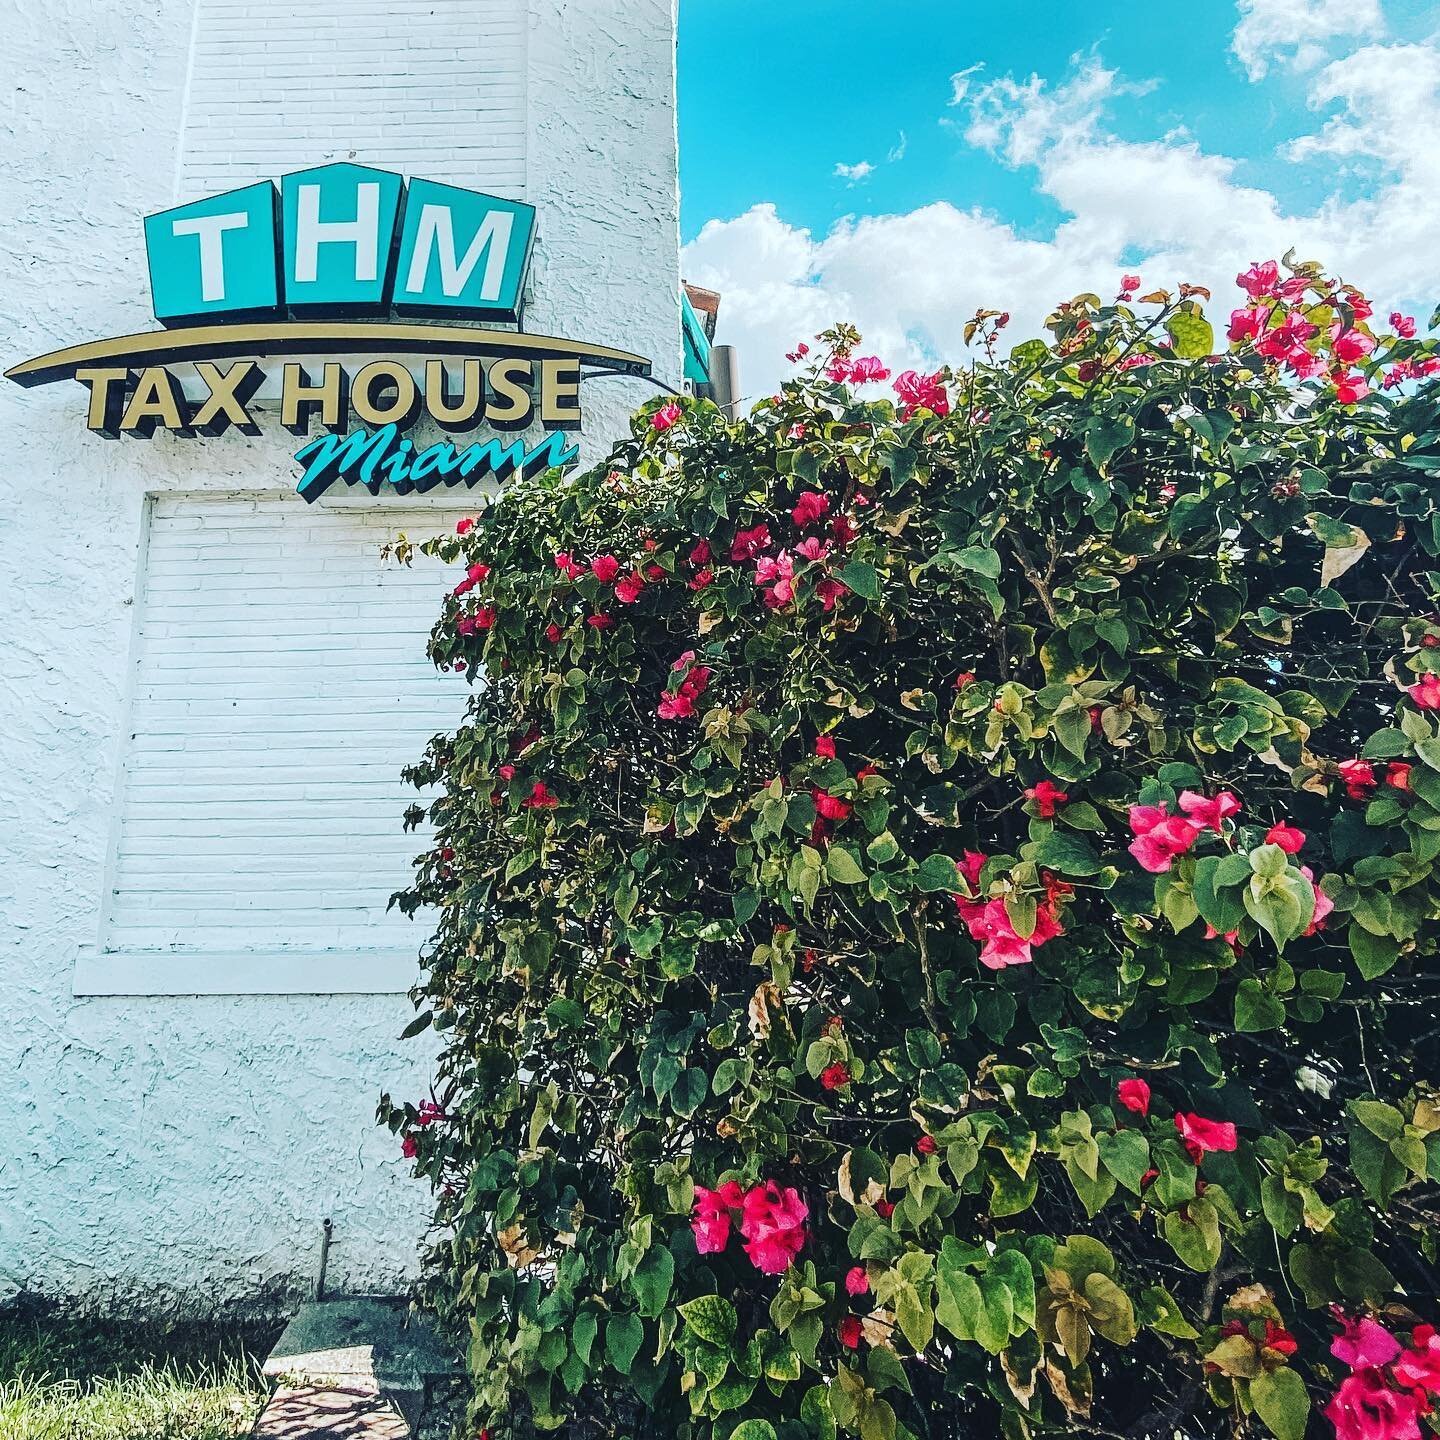 TAX TIME 💵

It&rsquo;s that time of year again and we are excited to welcome you back Tax Fam.

Our doors open Monday January 3rd, 2022 and as always we are working by appointment only- book online at www.taxhousemiami.com

*Friendly reminder: you m